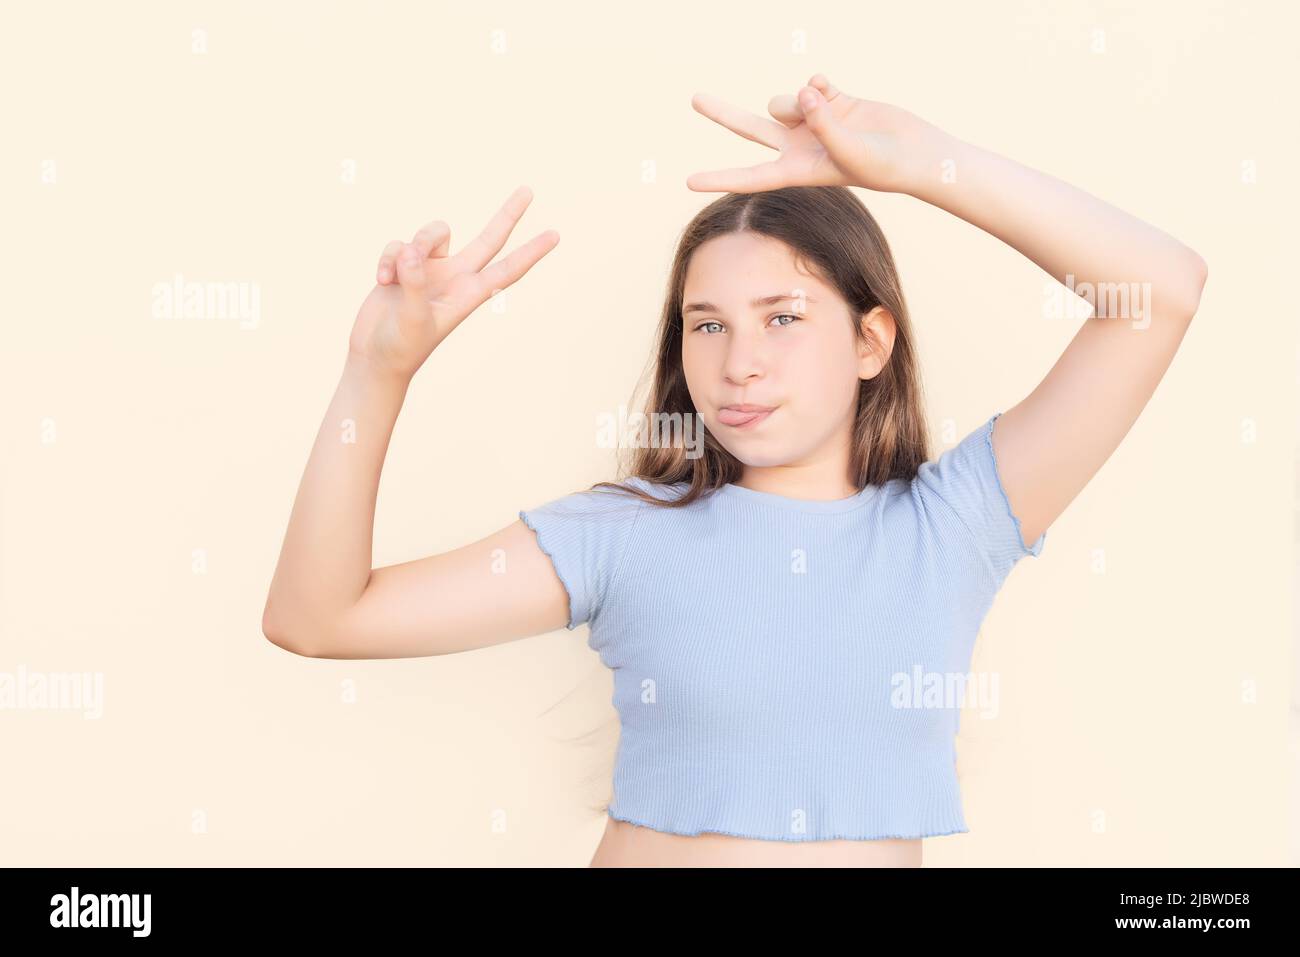 Young Caucasian girl making funny gesture with tongue out and fingers in victory sign on beige isolated background Stock Photo